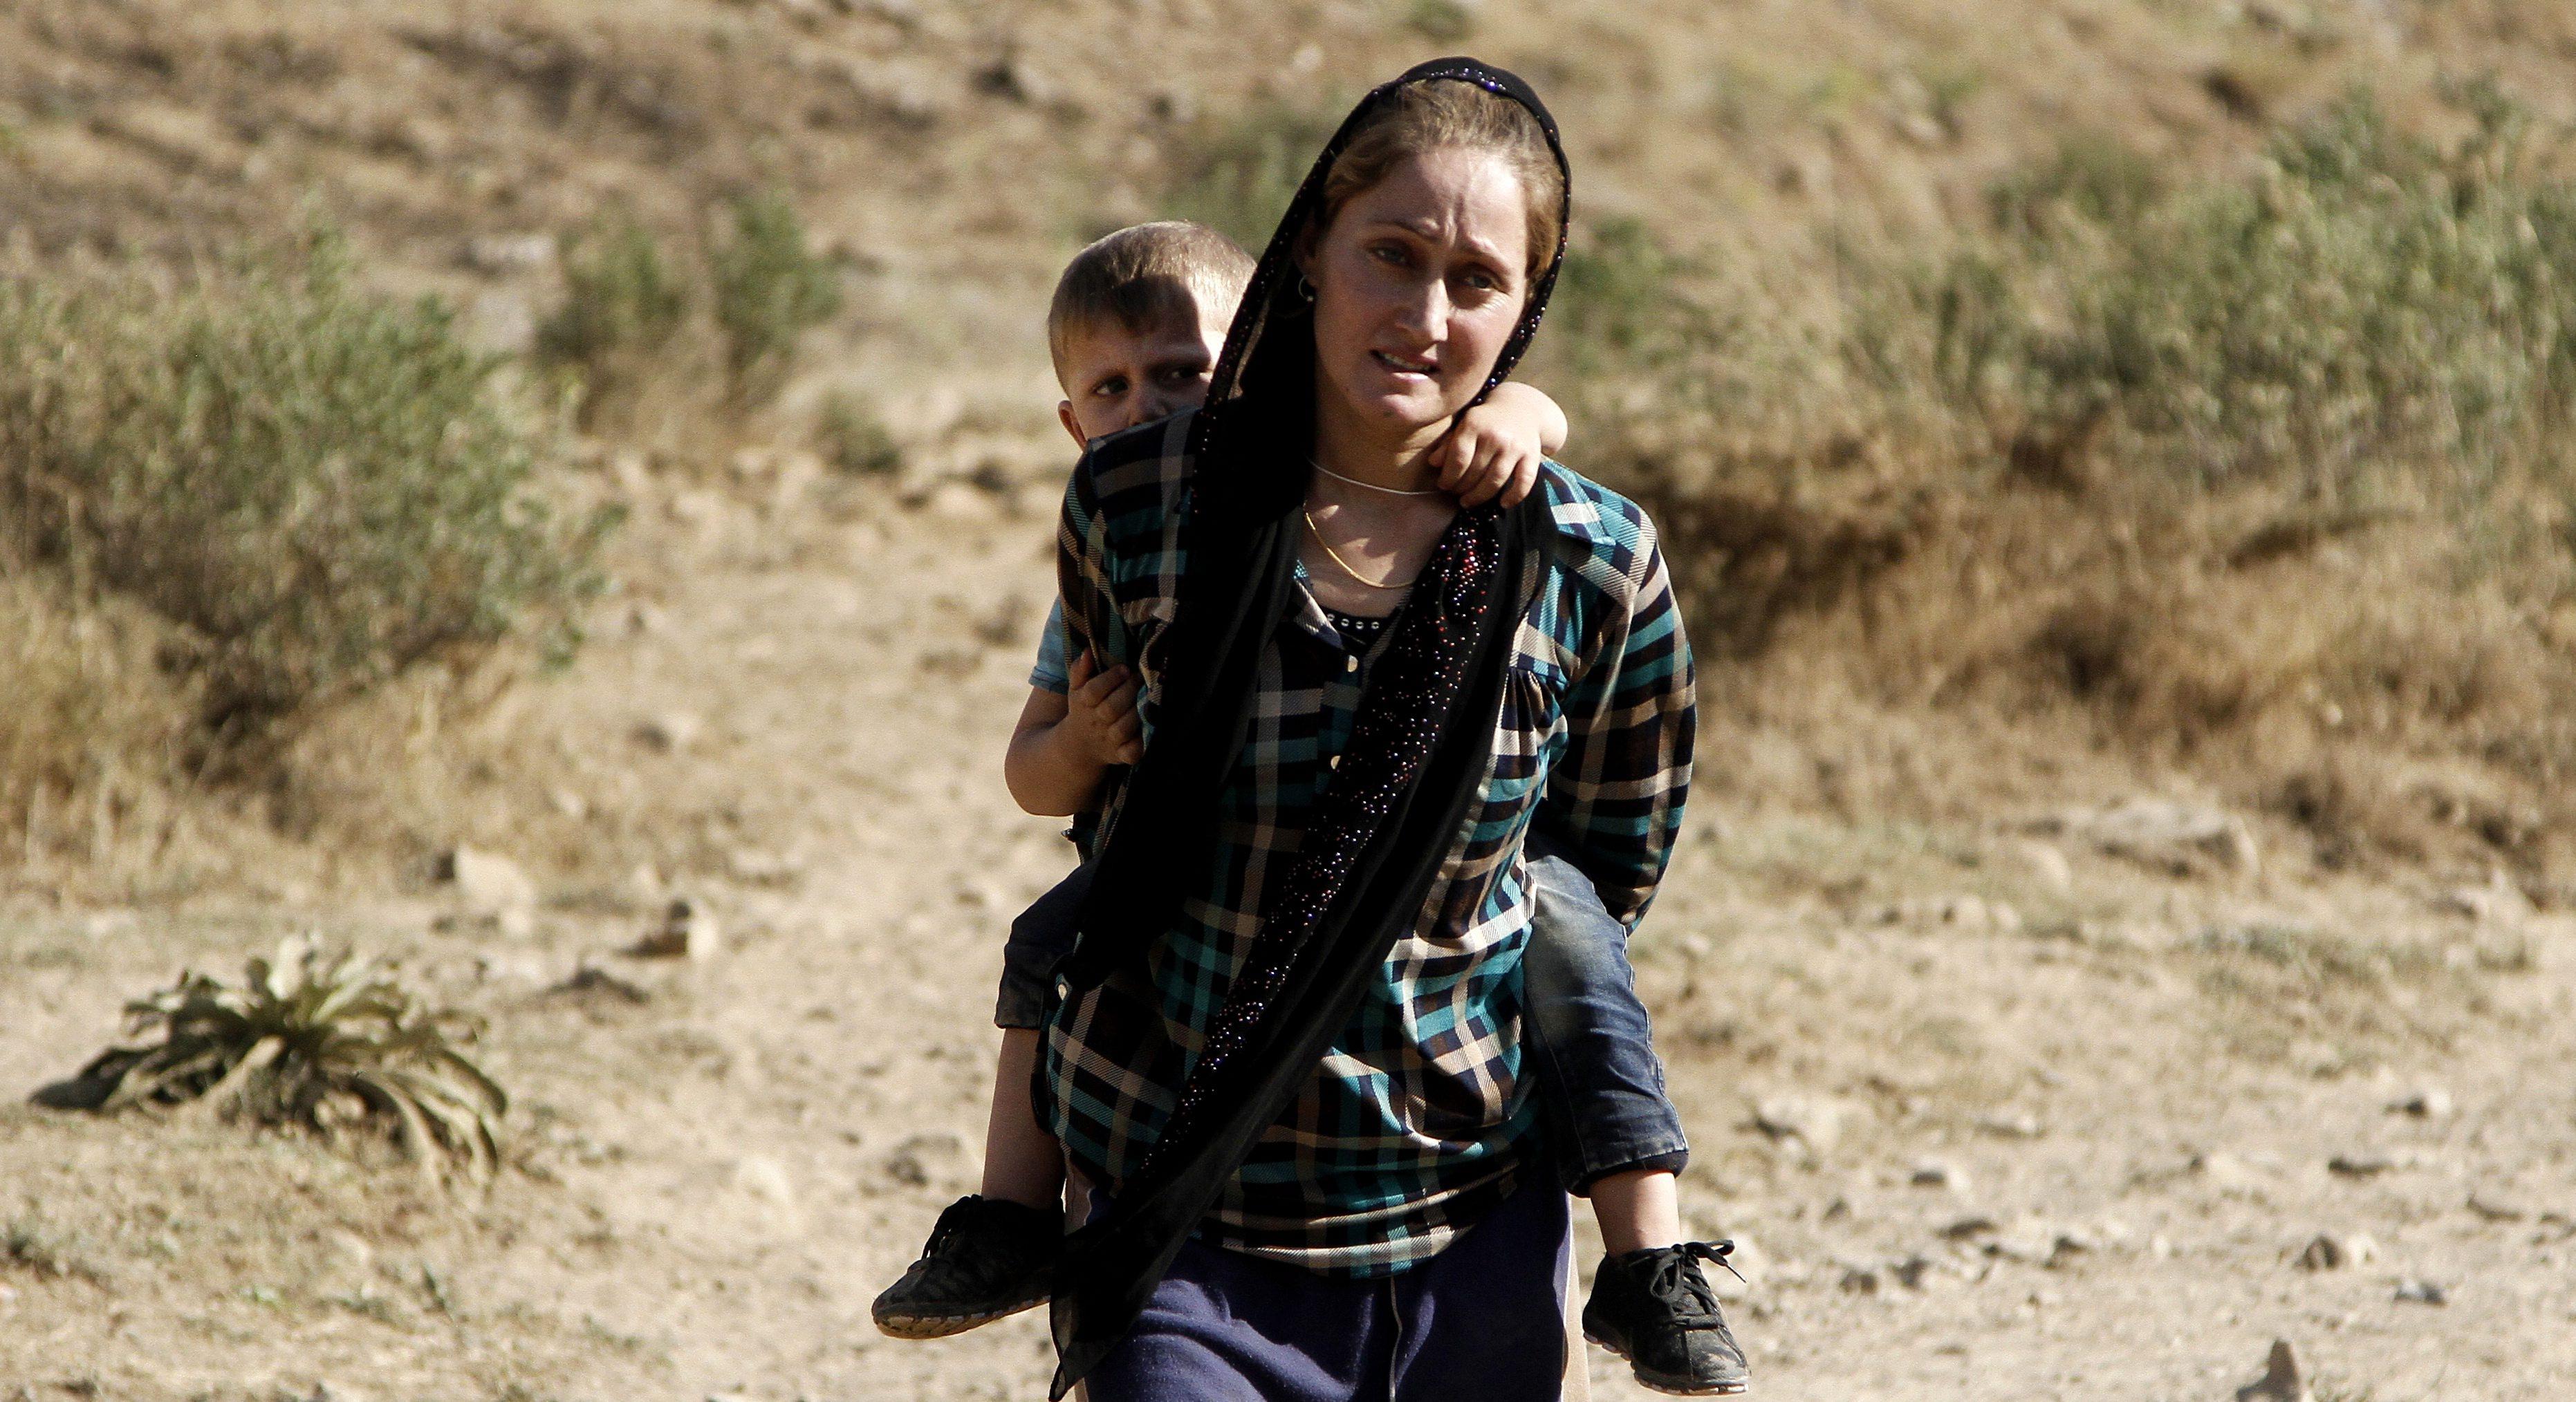 A Yazidi refugee woman carries her son on her back as they flee from Iraq in 2014. Photo: EPA